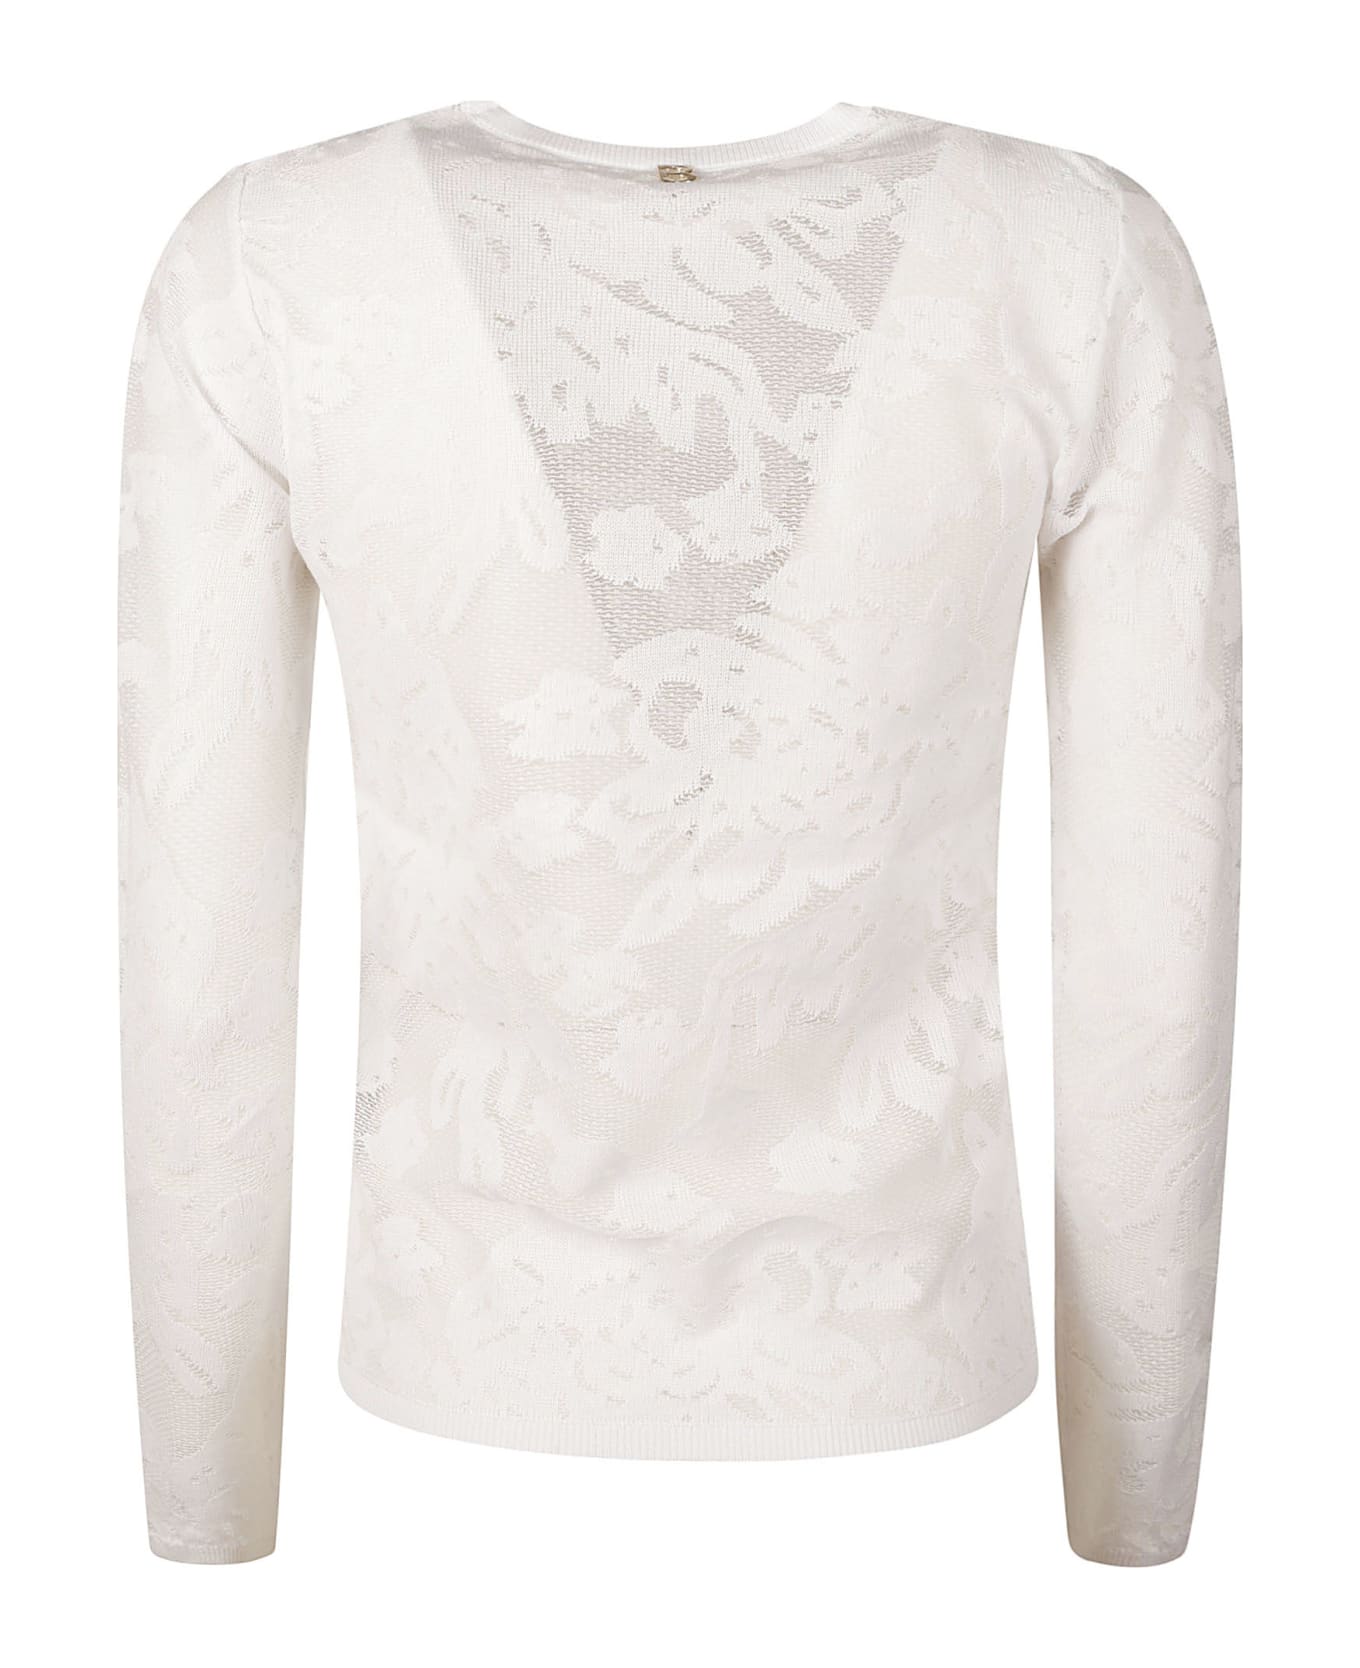 Blugirl Long-sleeved Floral Lace Top - Gesso